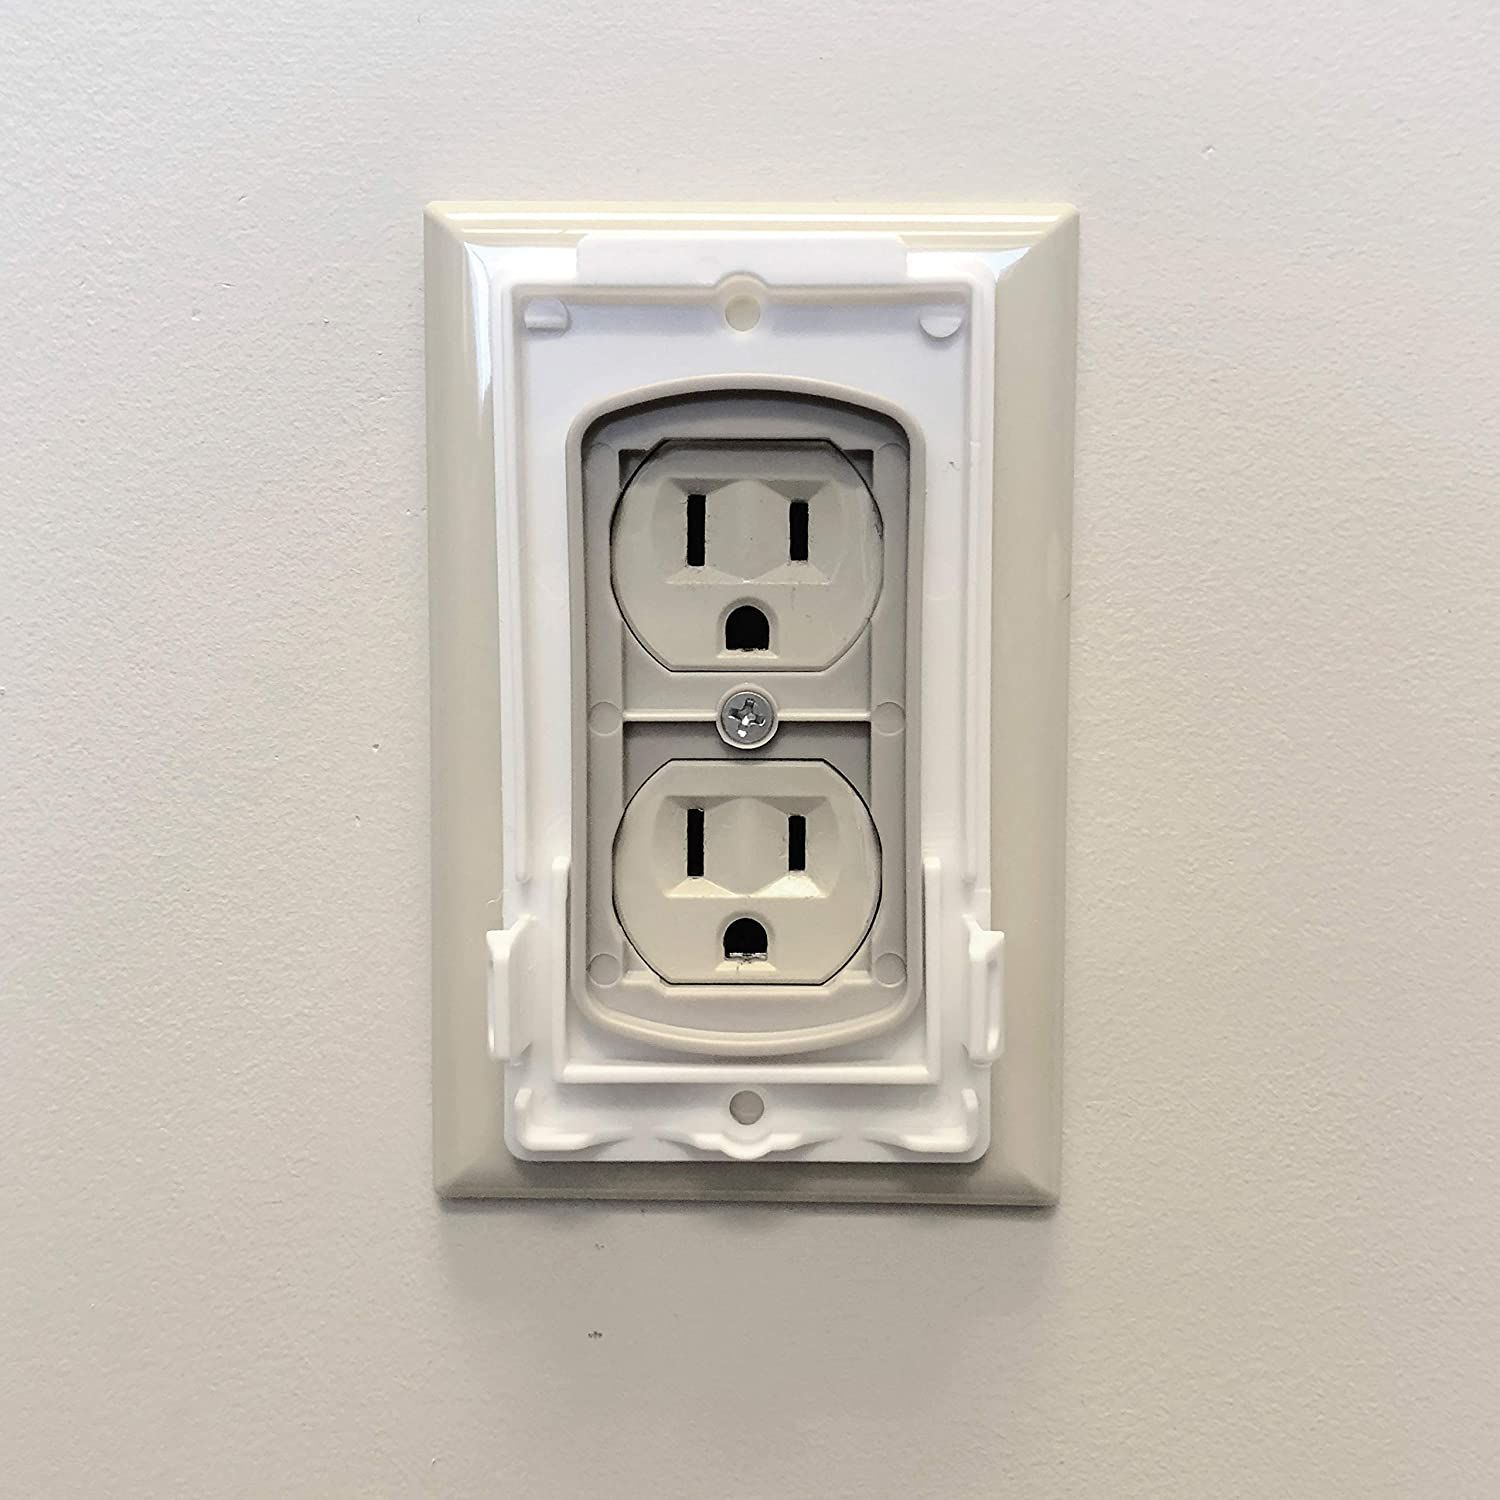 Dreambaby Outlet Plug Cover how it works